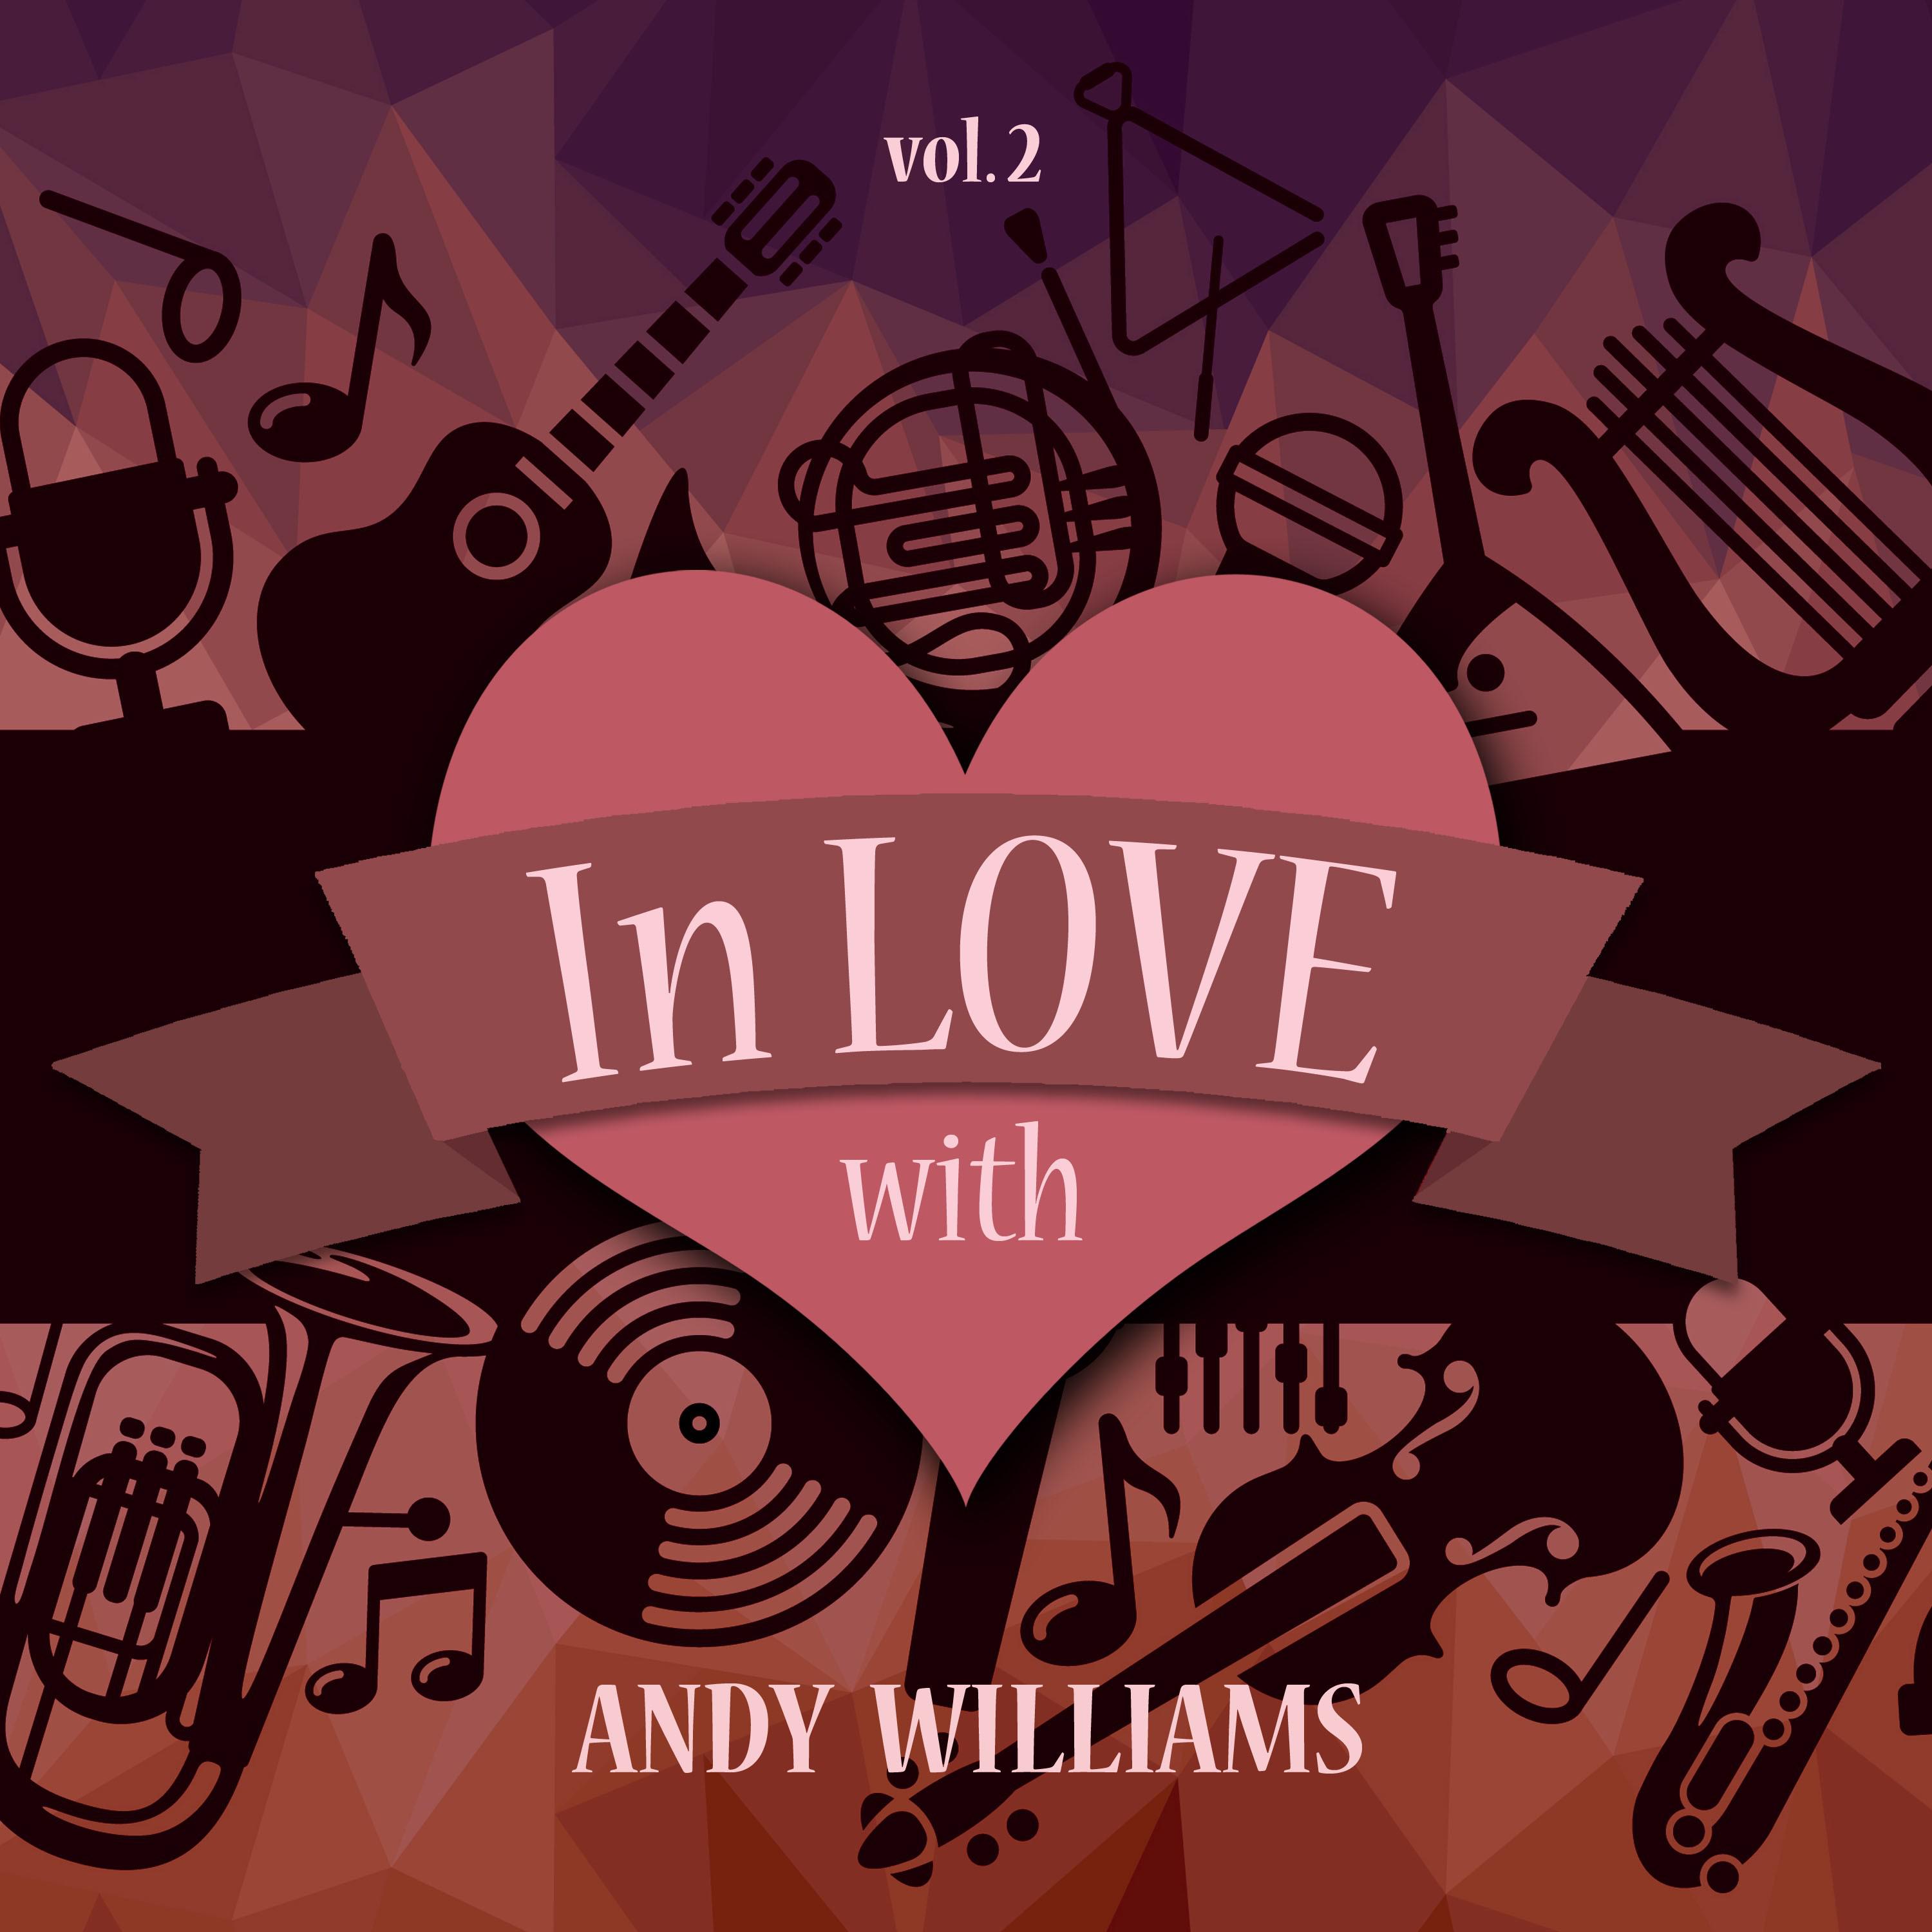 In Love with Andy Williams, Vol. 2